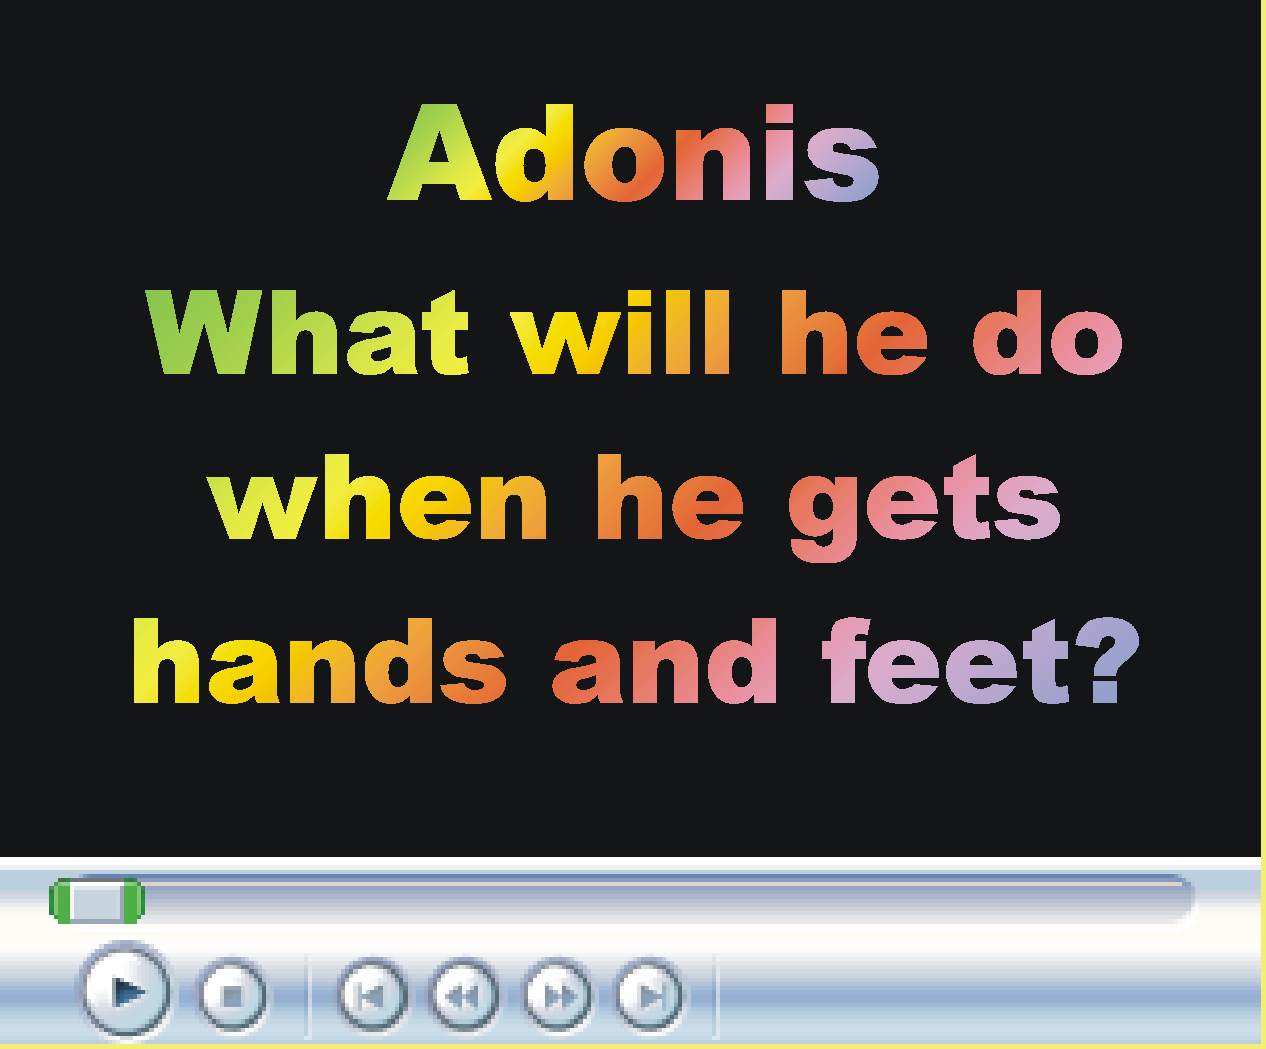 Adonis - waiting to see the dentist.